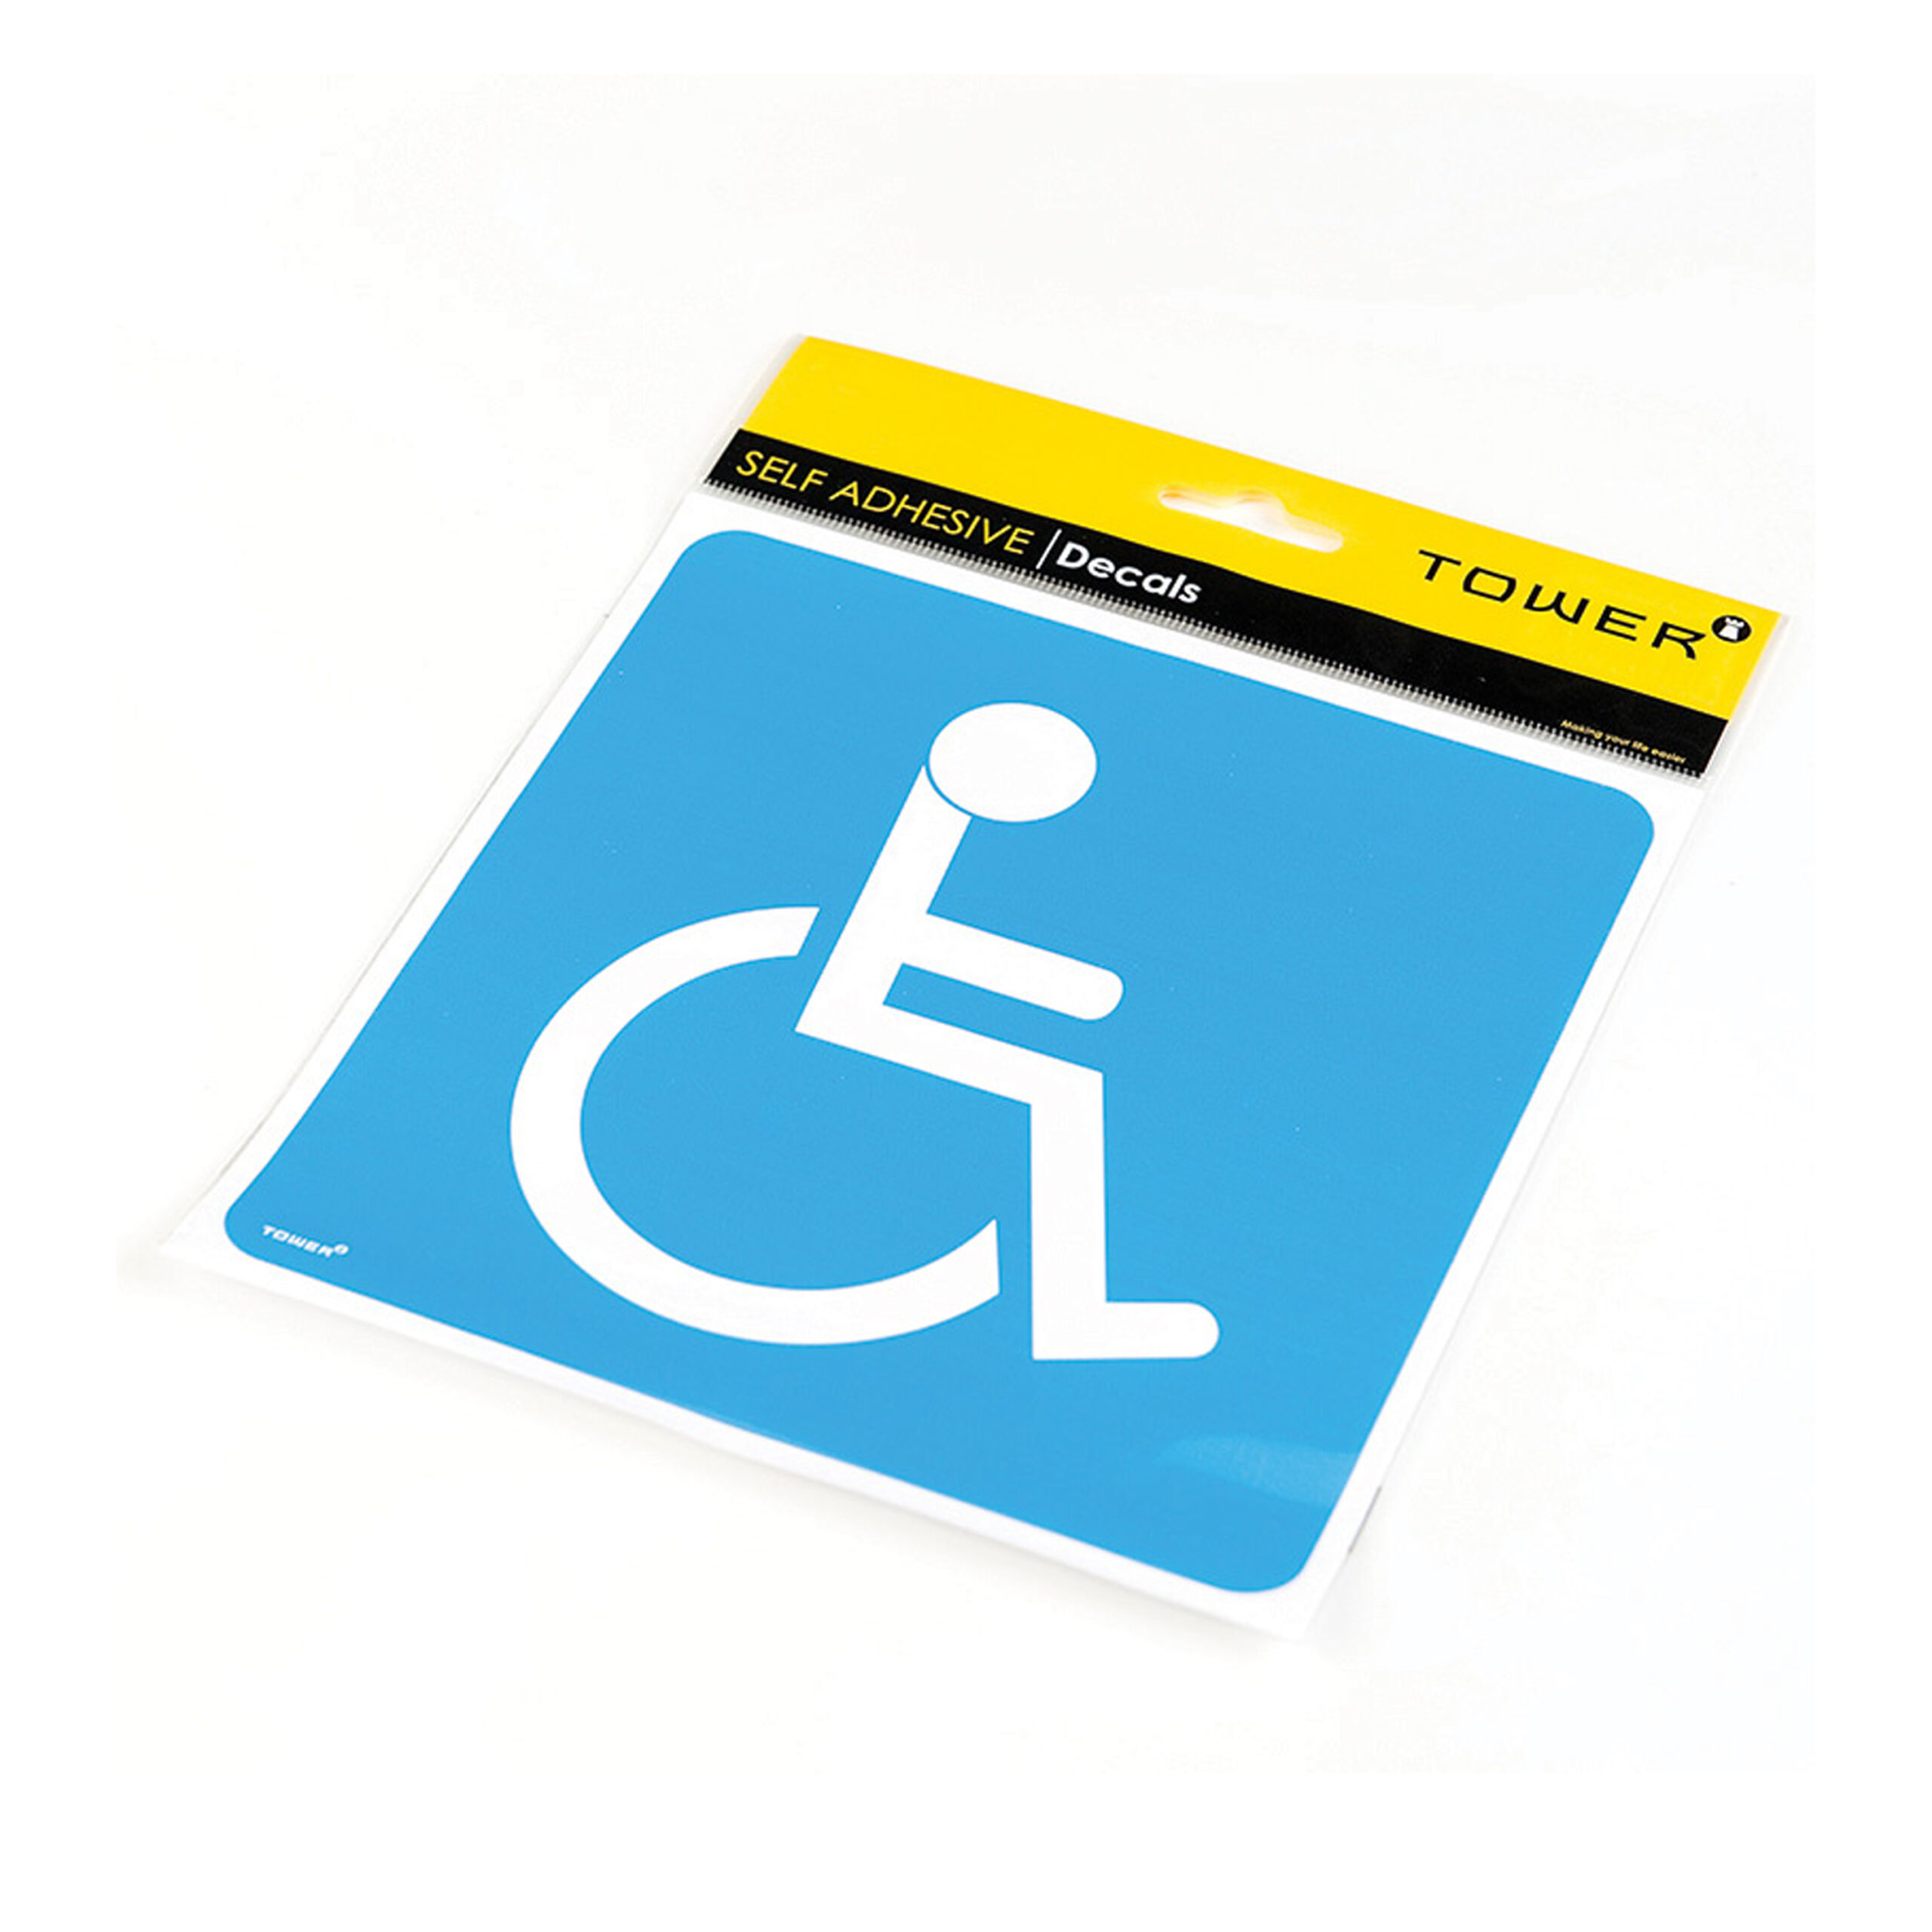 TOWER 
"PHYSICALLY
CHALLENGED"
SIGNAGE 
165x172mm